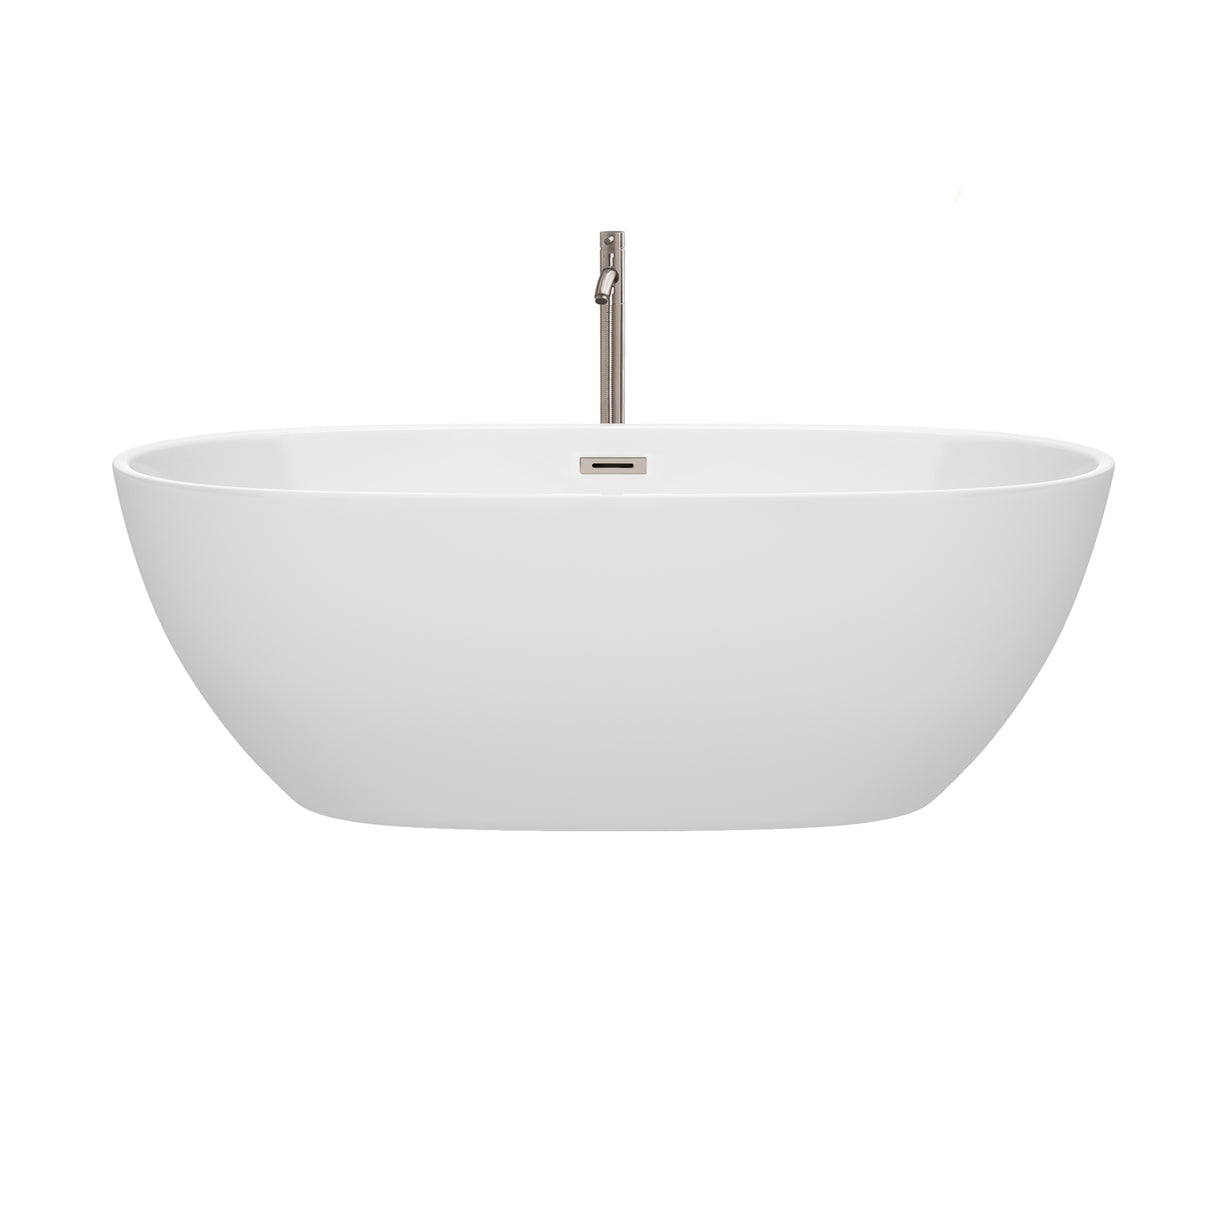 Juno 67 Inch Freestanding Bathtub in White with Floor Mounted Faucet Drain and Overflow Trim in Brushed Nickel